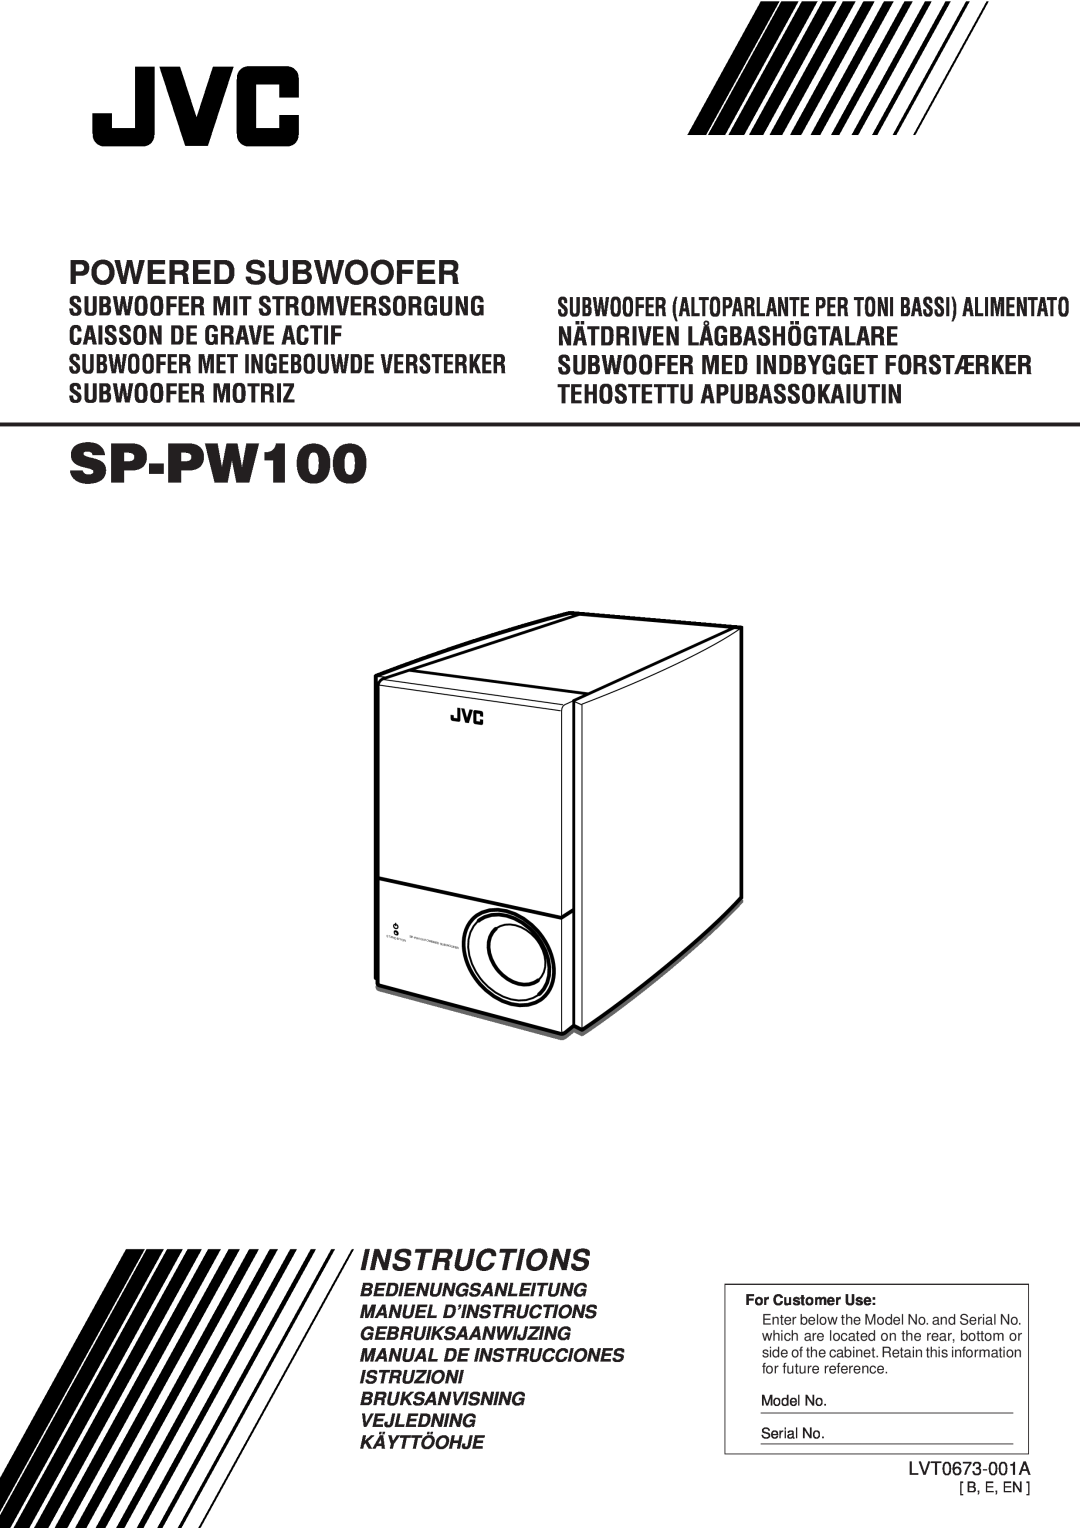 JVC LVT0673-001A manual SP-PW100, Instructions, Powered Subwoofer Compact Component System, T An, U Bw, By /O N, S P-Pw 